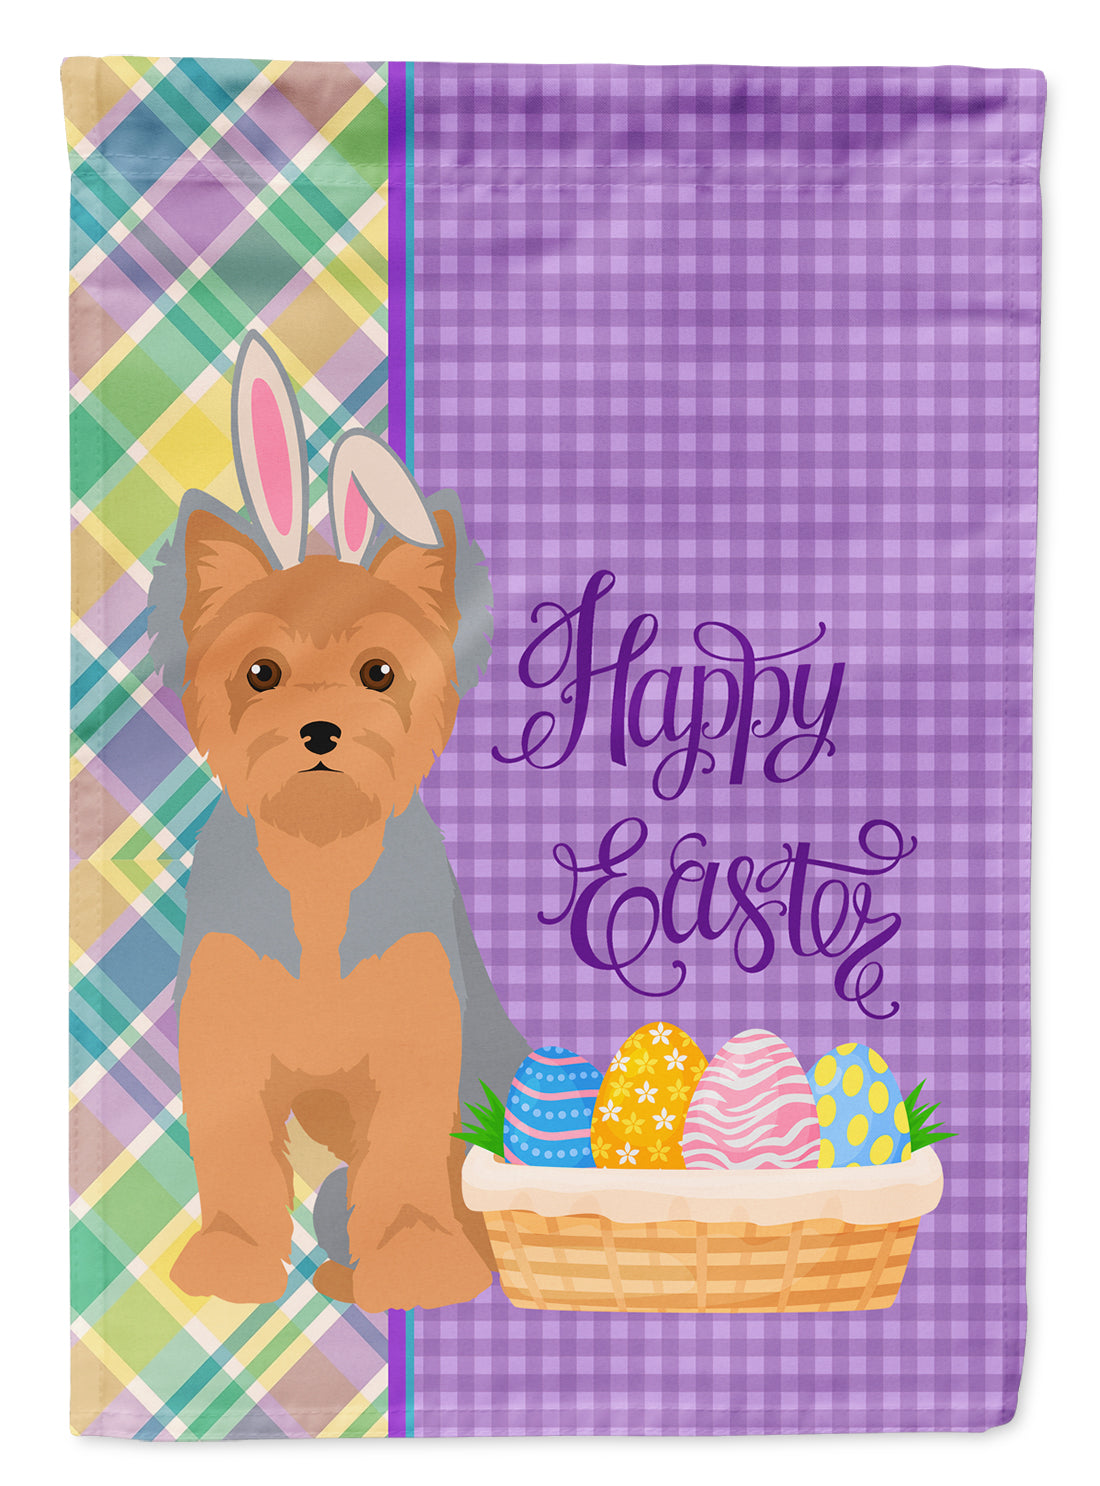 Blue and Tan Puppy Cut Yorkshire Terrier Easter Flag Garden Size  the-store.com.